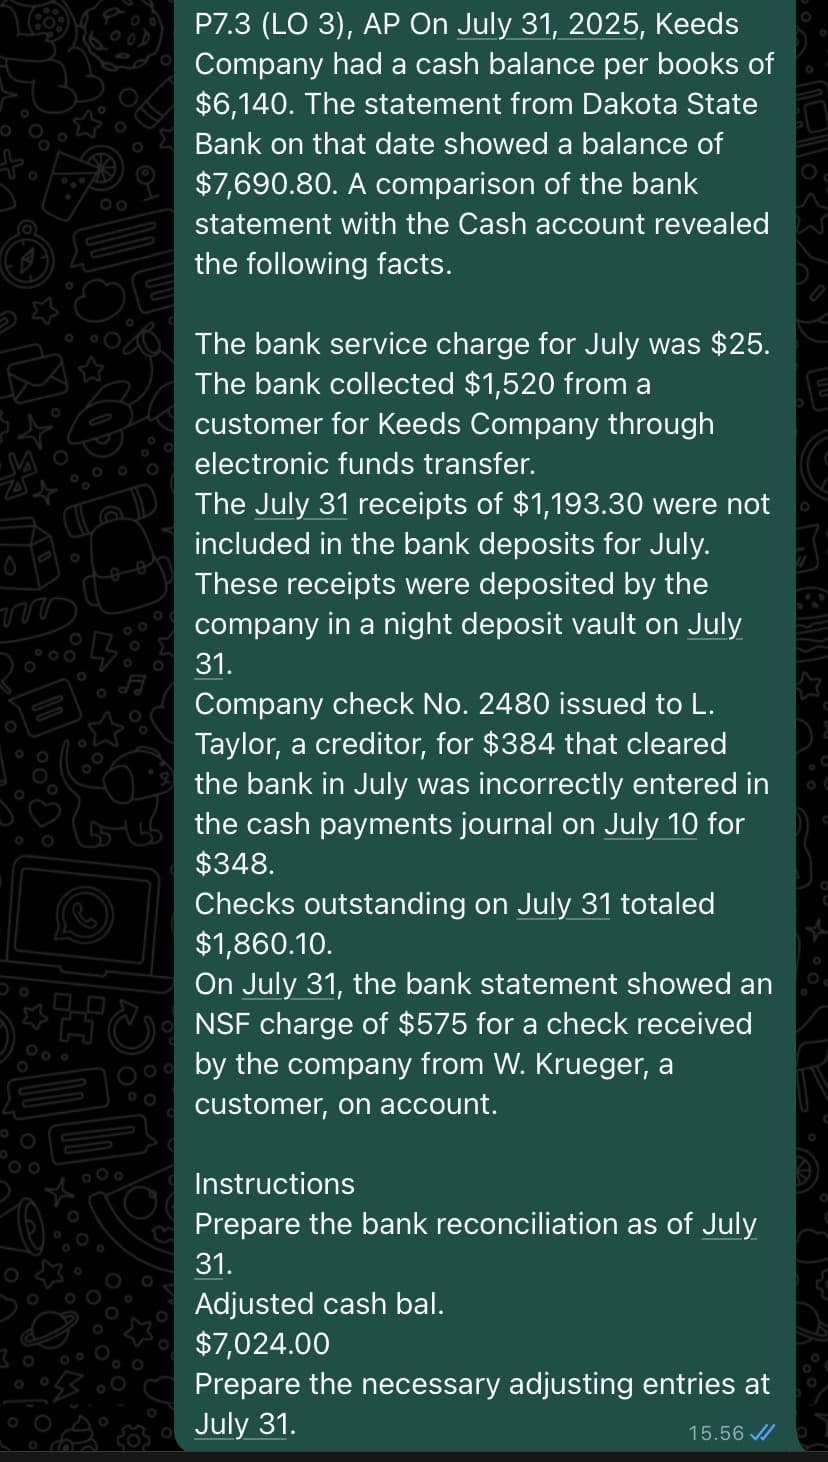 www
O
0
P7.3 (LO 3), AP On July 31, 2025, Keeds
Company had a cash balance per books of
$6,140. The statement from Dakota State
Bank on that date showed a balance of
$7,690.80. A comparison of the bank
statement with the Cash account revealed
the following facts.
The bank service charge for July was $25.
The bank collected $1,520 from a
customer for Keeds Company through
electronic funds transfer.
The July 31 receipts of $1,193.30 were not
included in the bank deposits for July.
These receipts were deposited by the
company in a night deposit vault on July
31.
Company check No. 2480 issued to L.
Taylor, a creditor, for $384 that cleared
the bank in July was incorrectly entered in
the cash payments journal on July 10 for
$348.
Checks outstanding on July 31 totaled
$1,860.10.
On July 31, the bank statement showed an
NSF charge of $575 for a check received
by the company from W. Krueger, a
customer, on account.
Instructions
Prepare the bank reconciliation as of July
31.
Adjusted cash bal.
$7,024.00
Prepare the necessary adjusting entries at
July 31.
15.56